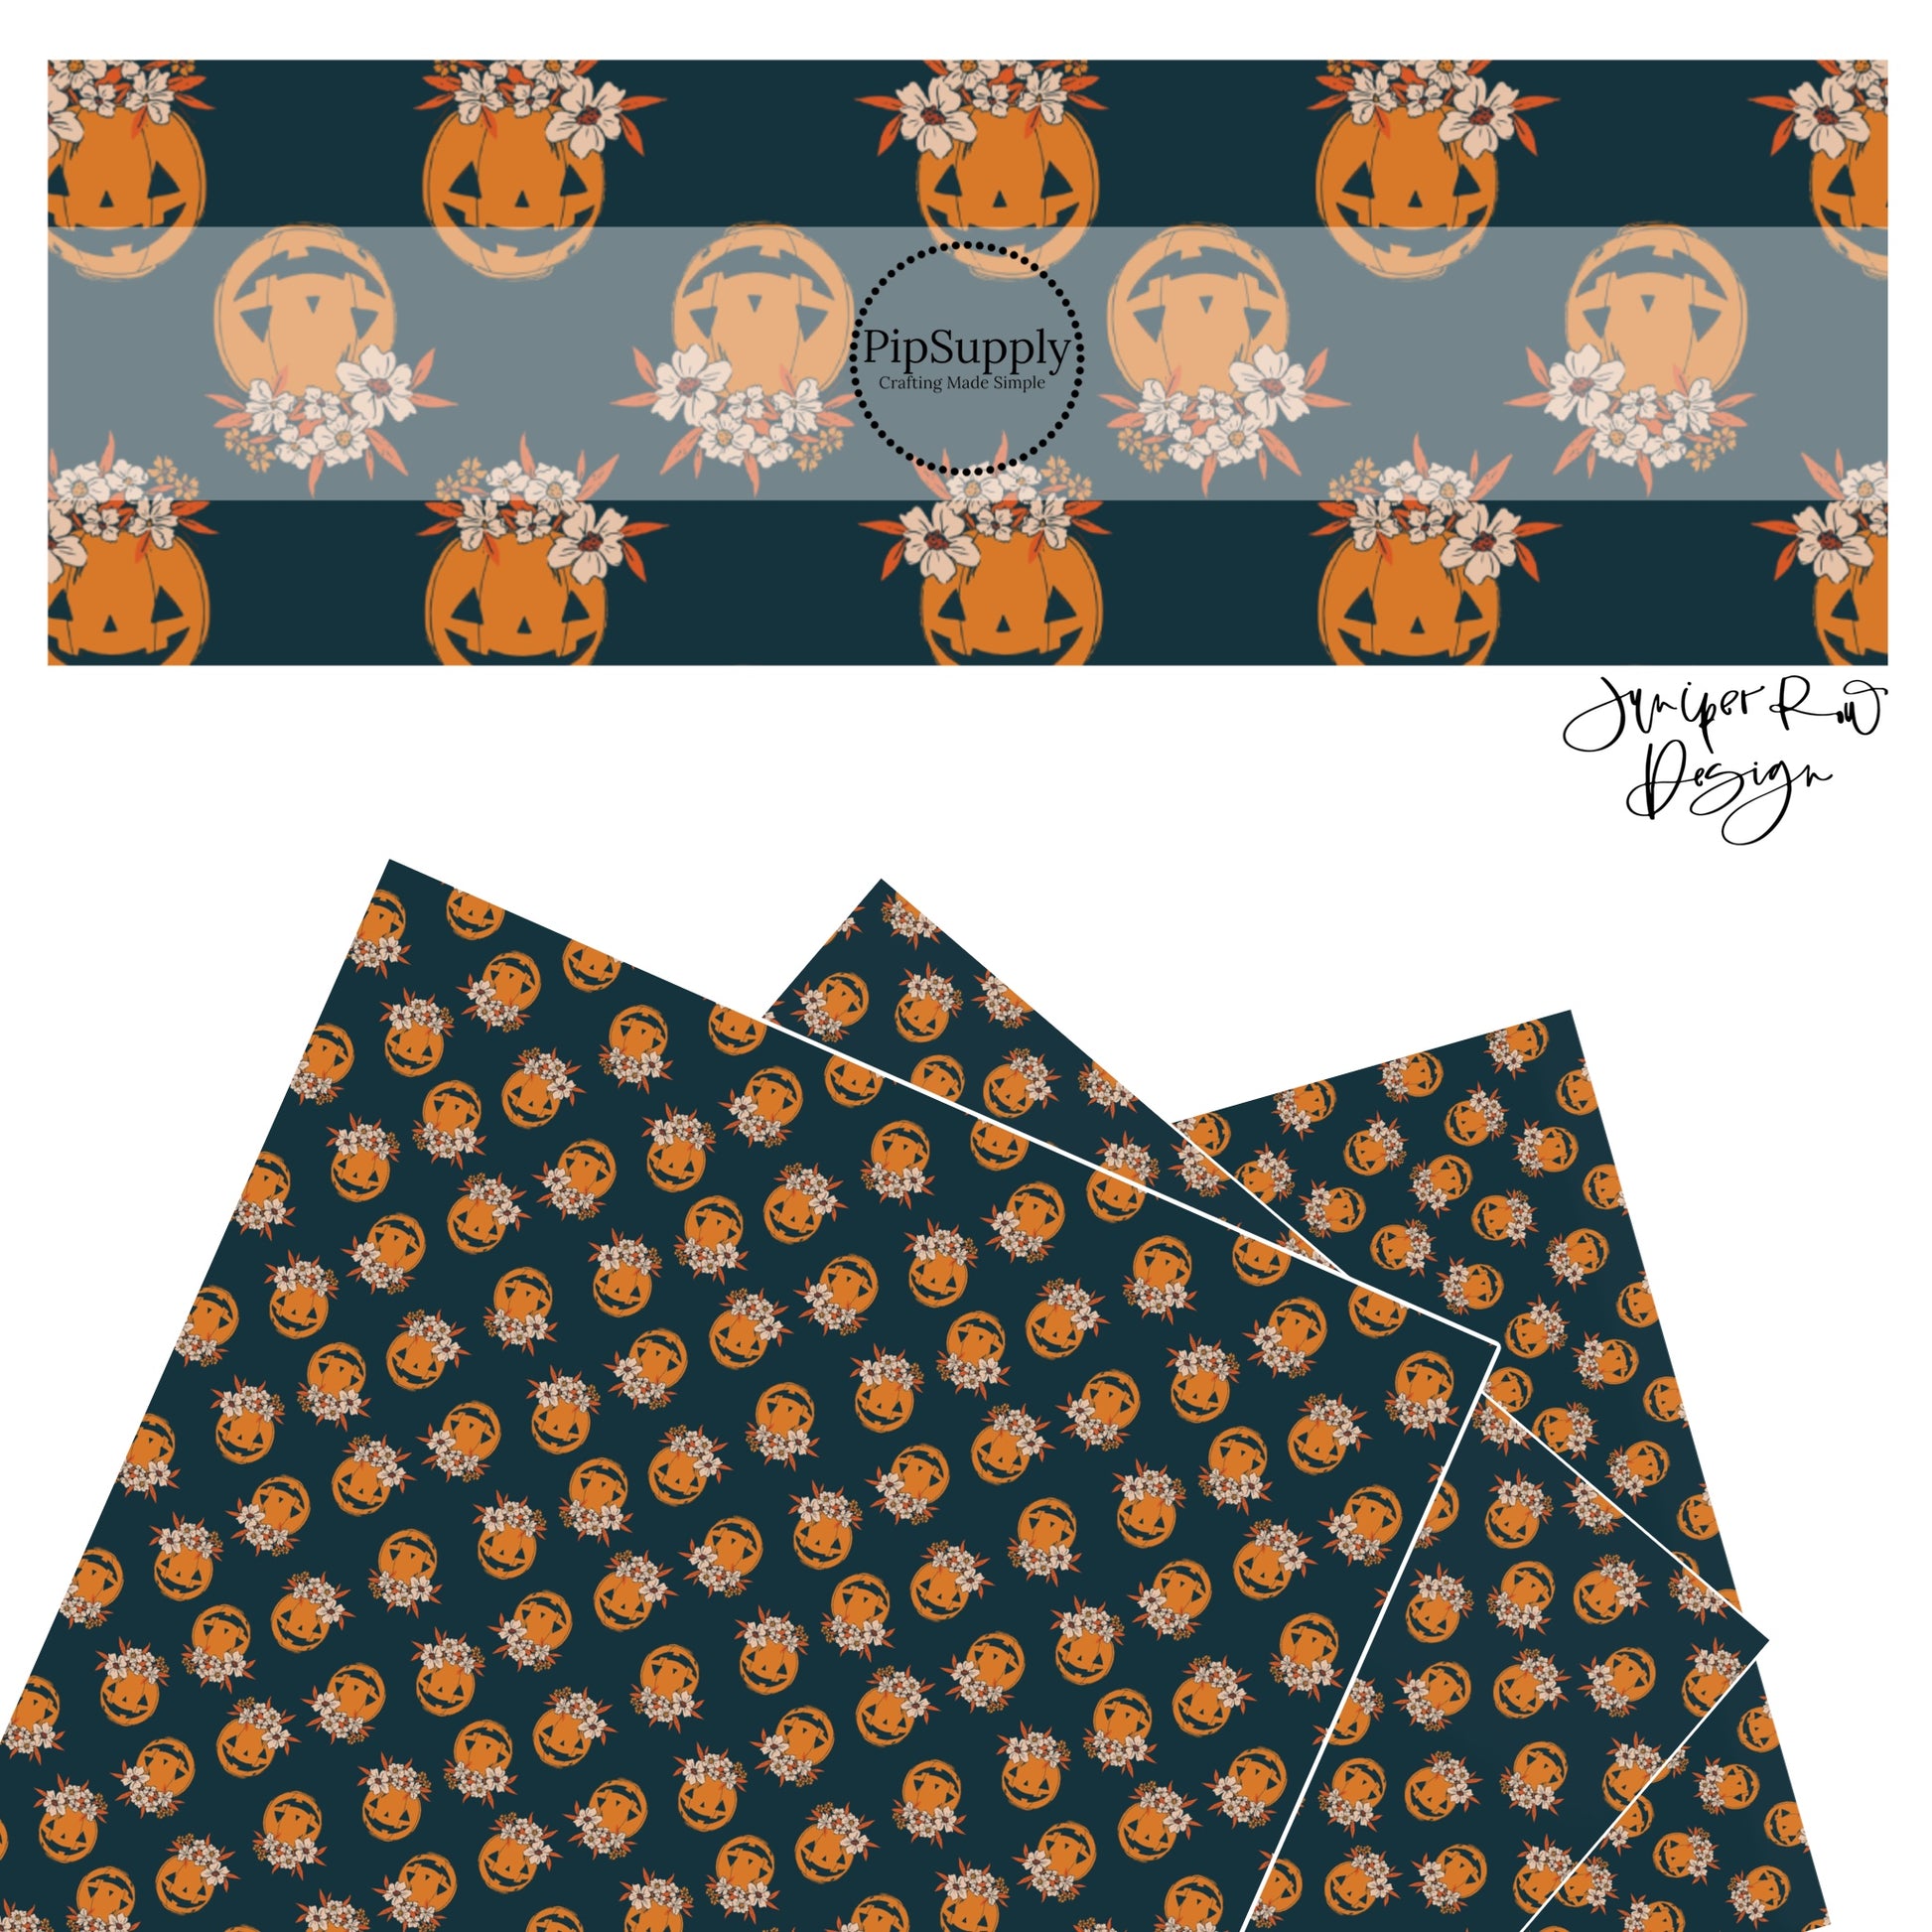 Orange pumpkins with flowers on black faux leather sheet